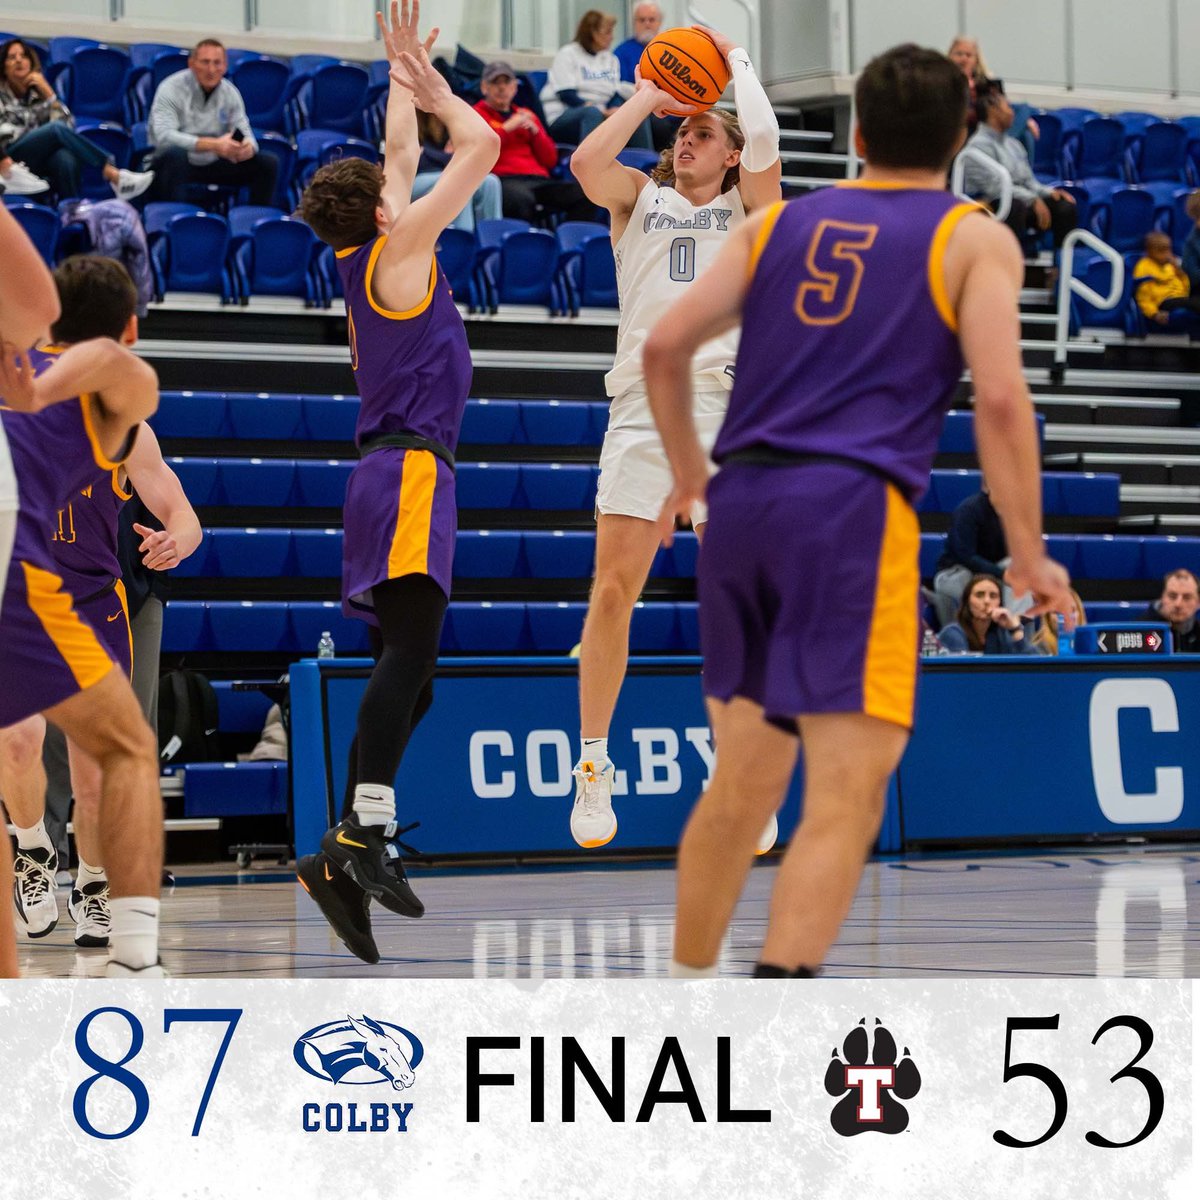 Heading into Thanksgiving break with a win! We are back in action on Mayflower Hill Sunday at 1 PM